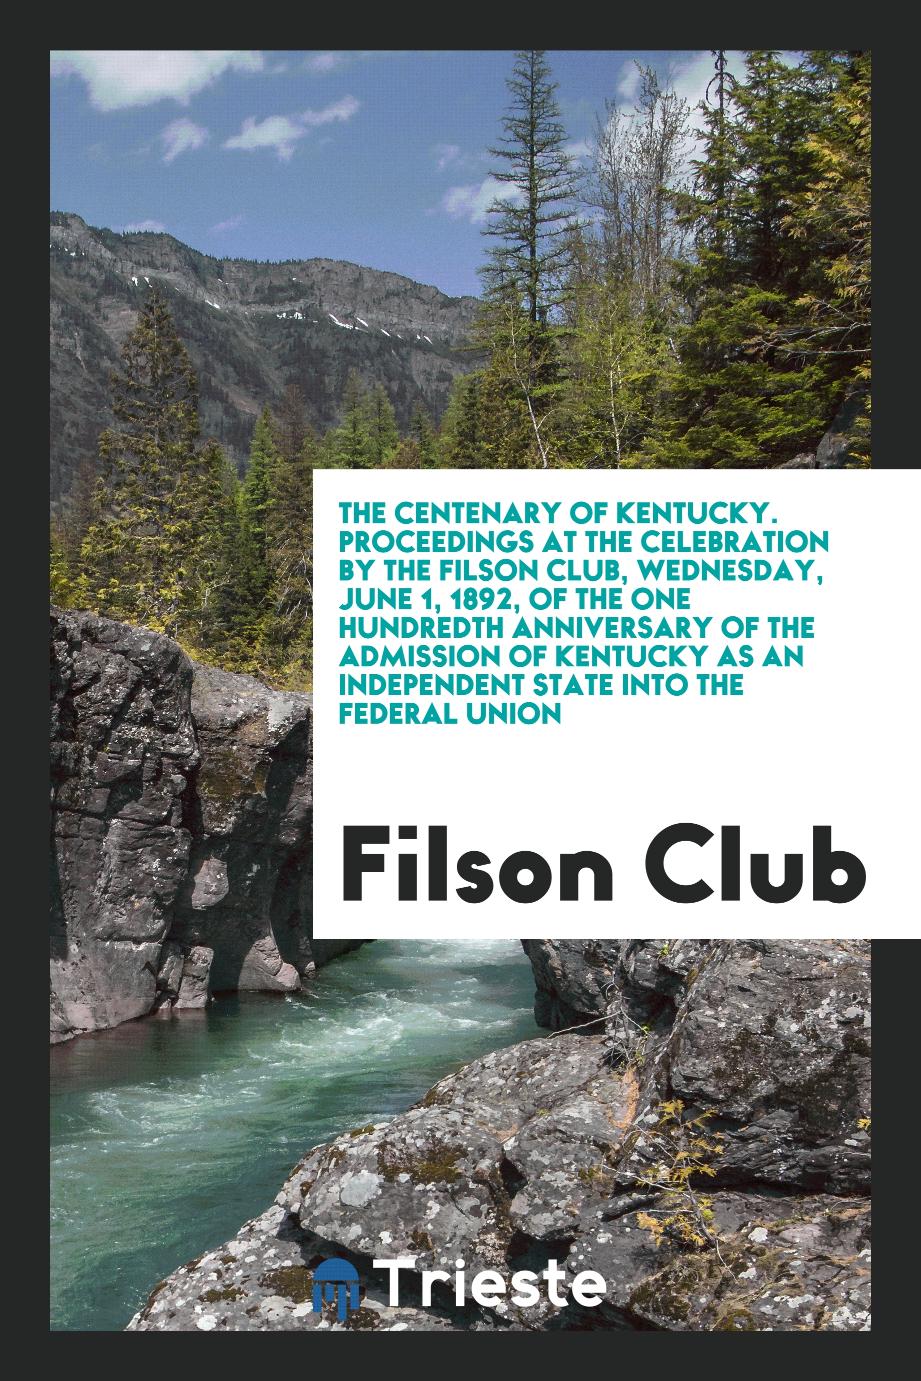 The Centenary of Kentucky. Proceedings at the Celebration by the Filson Club, Wednesday, June 1, 1892, of the One Hundredth Anniversary of the Admission of Kentucky as an Independent State into the Federal Union